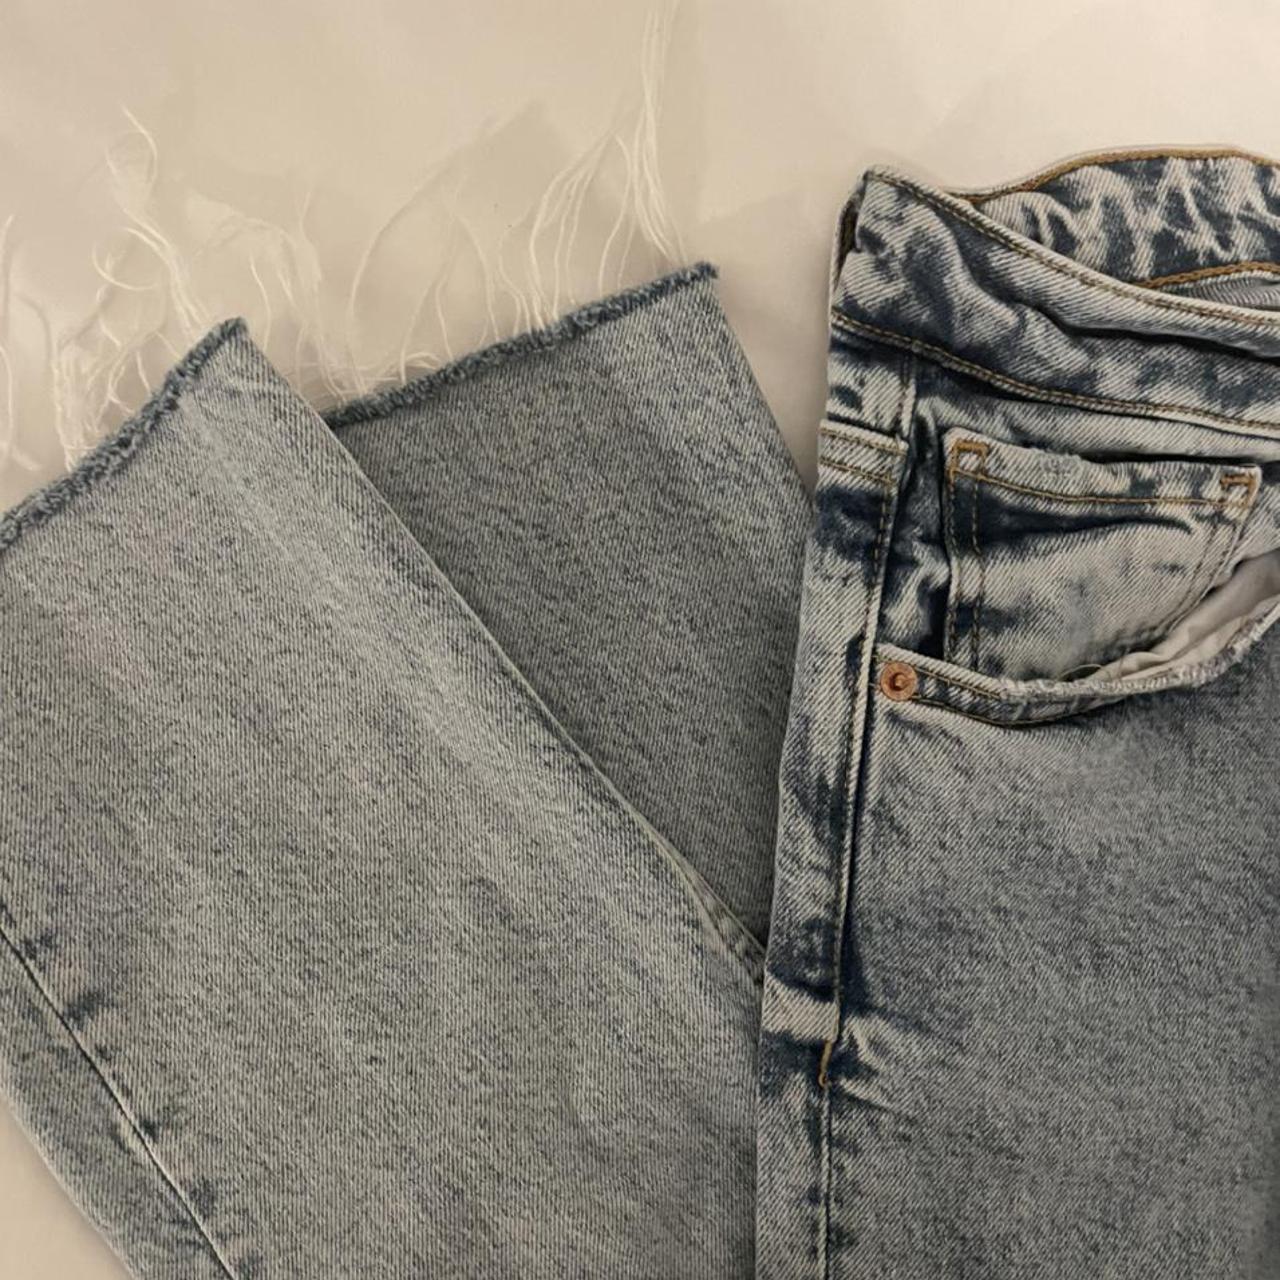 Zara Acid Washed Mom Jeans! I’m obsessed with these... - Depop